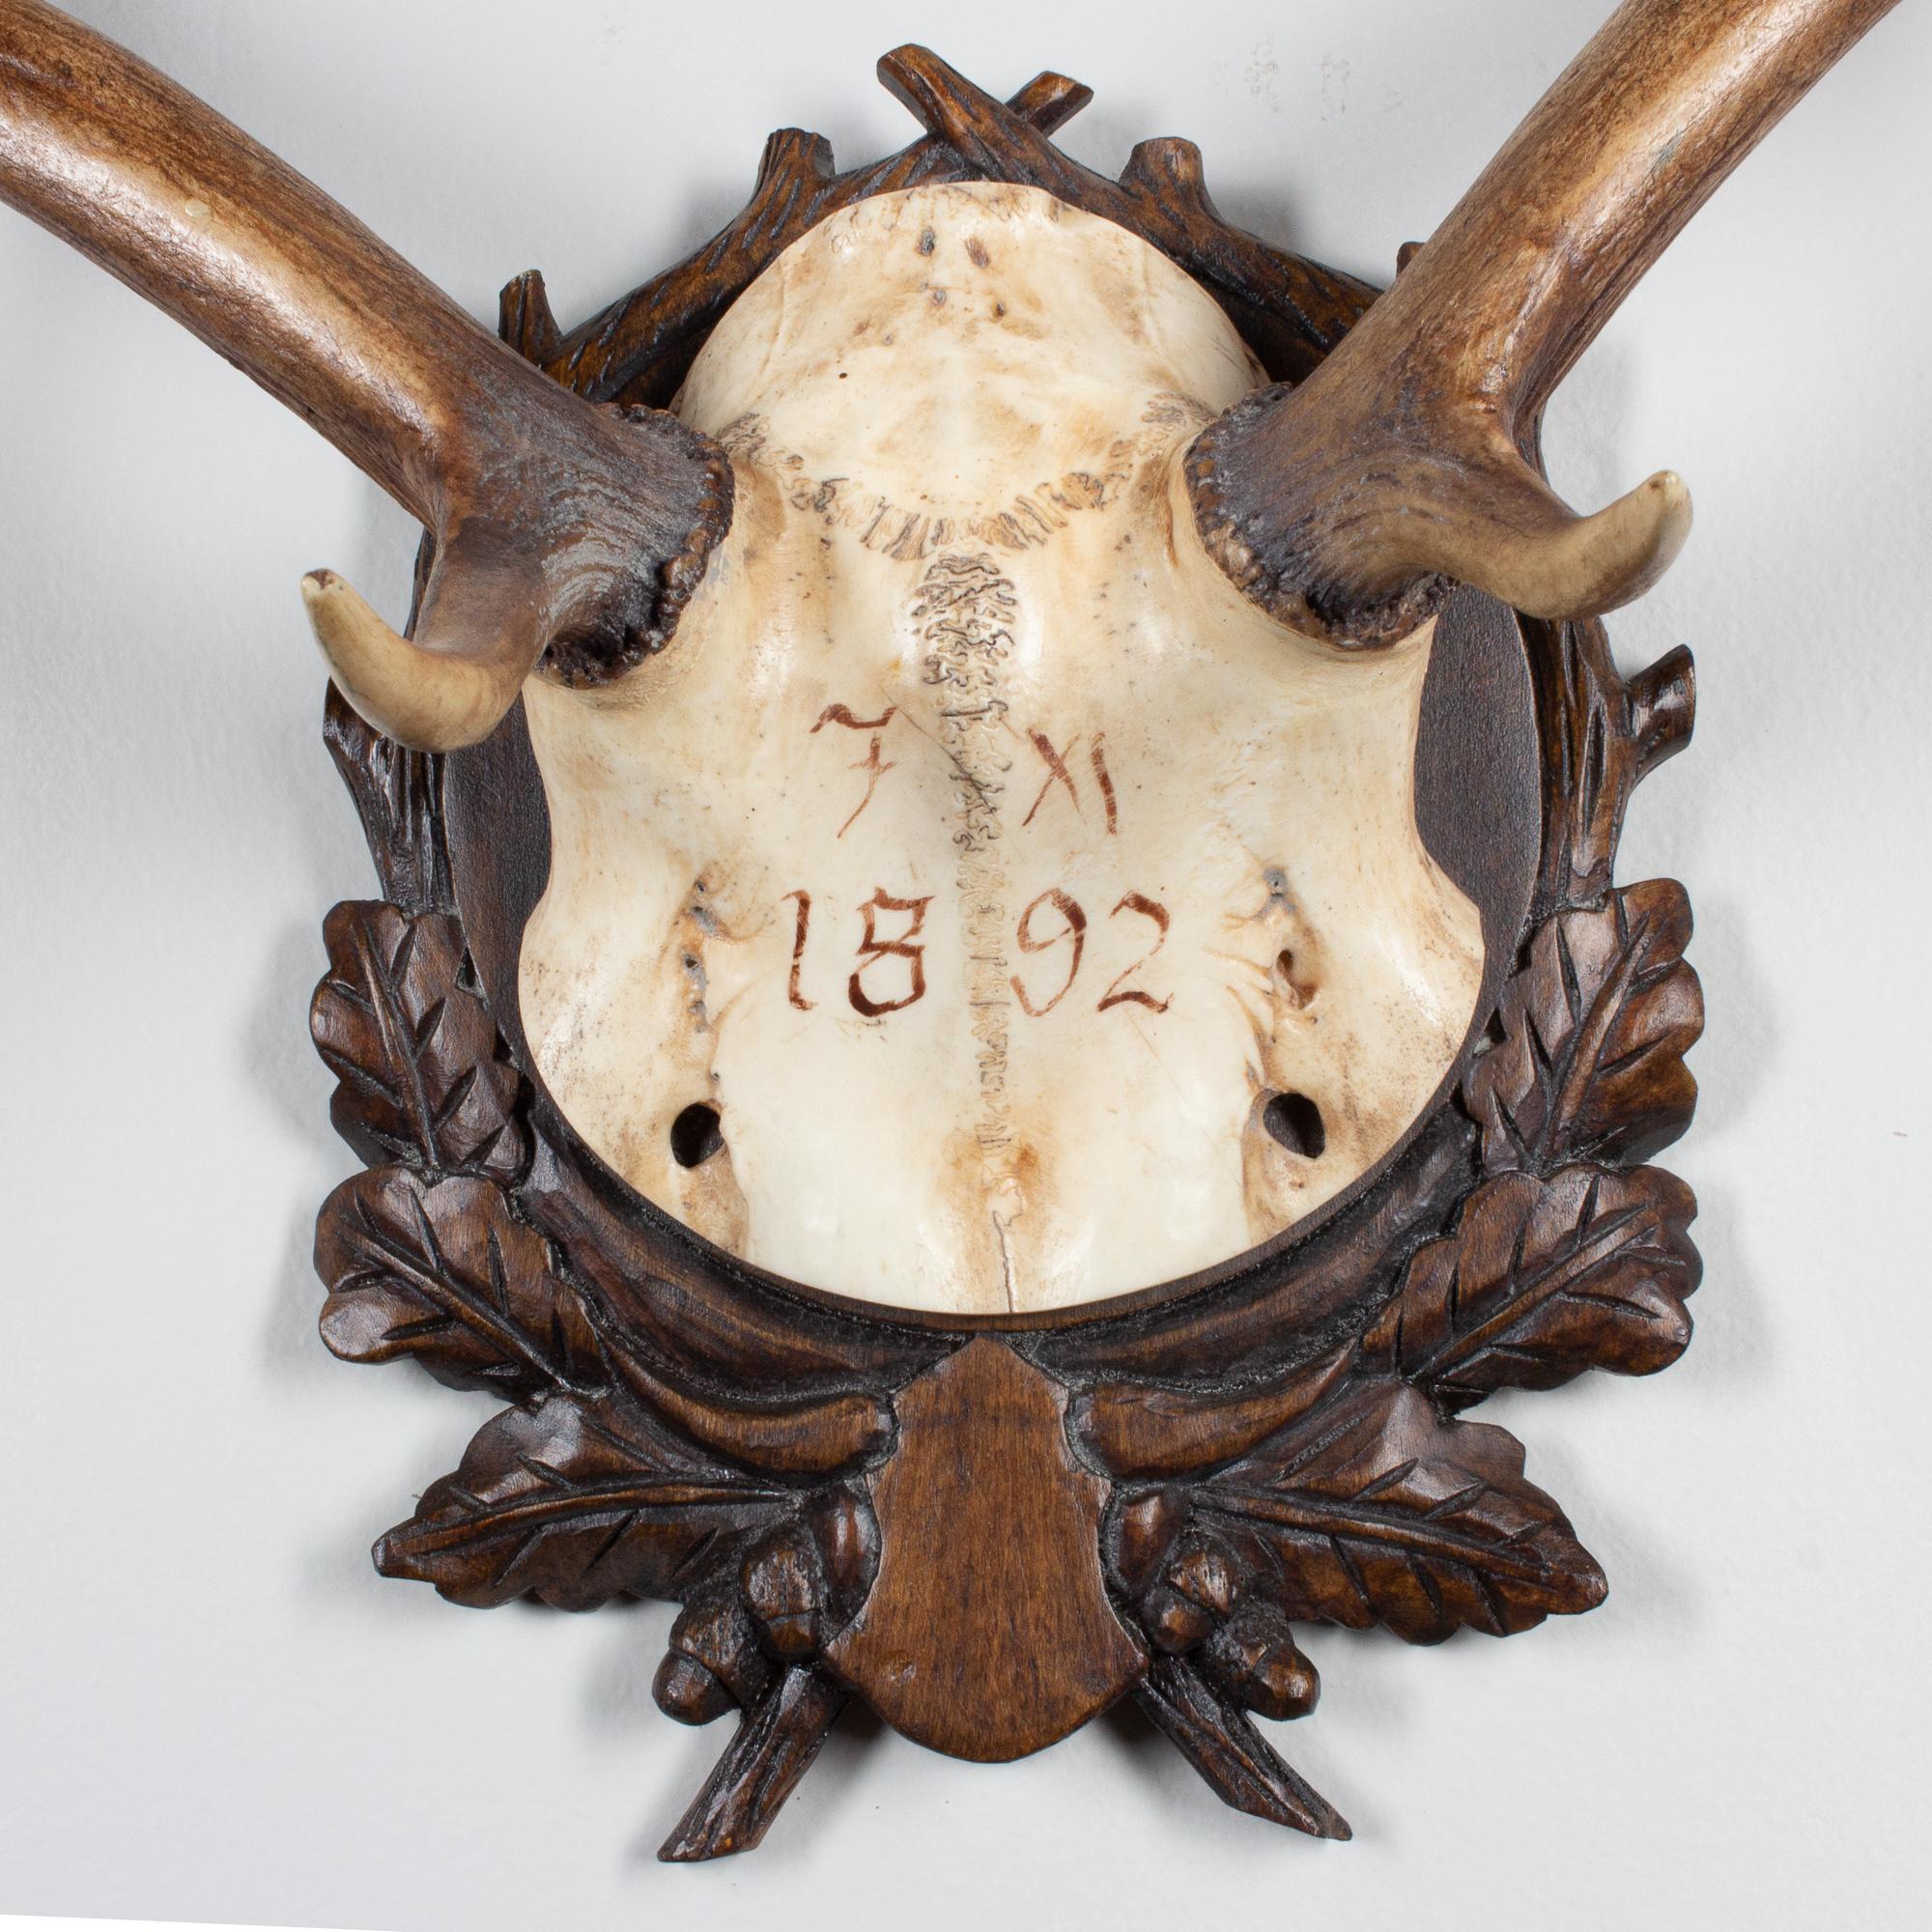 19th century Austrian fallow deer trophy on original Black Forest carved plaque that hung in Emperor Franz Josef's castle at Eckartsau in the Southern Austrian Alps. Eckartsau was a favorite hunting Schloss of the Habsburg family. The plaque itself